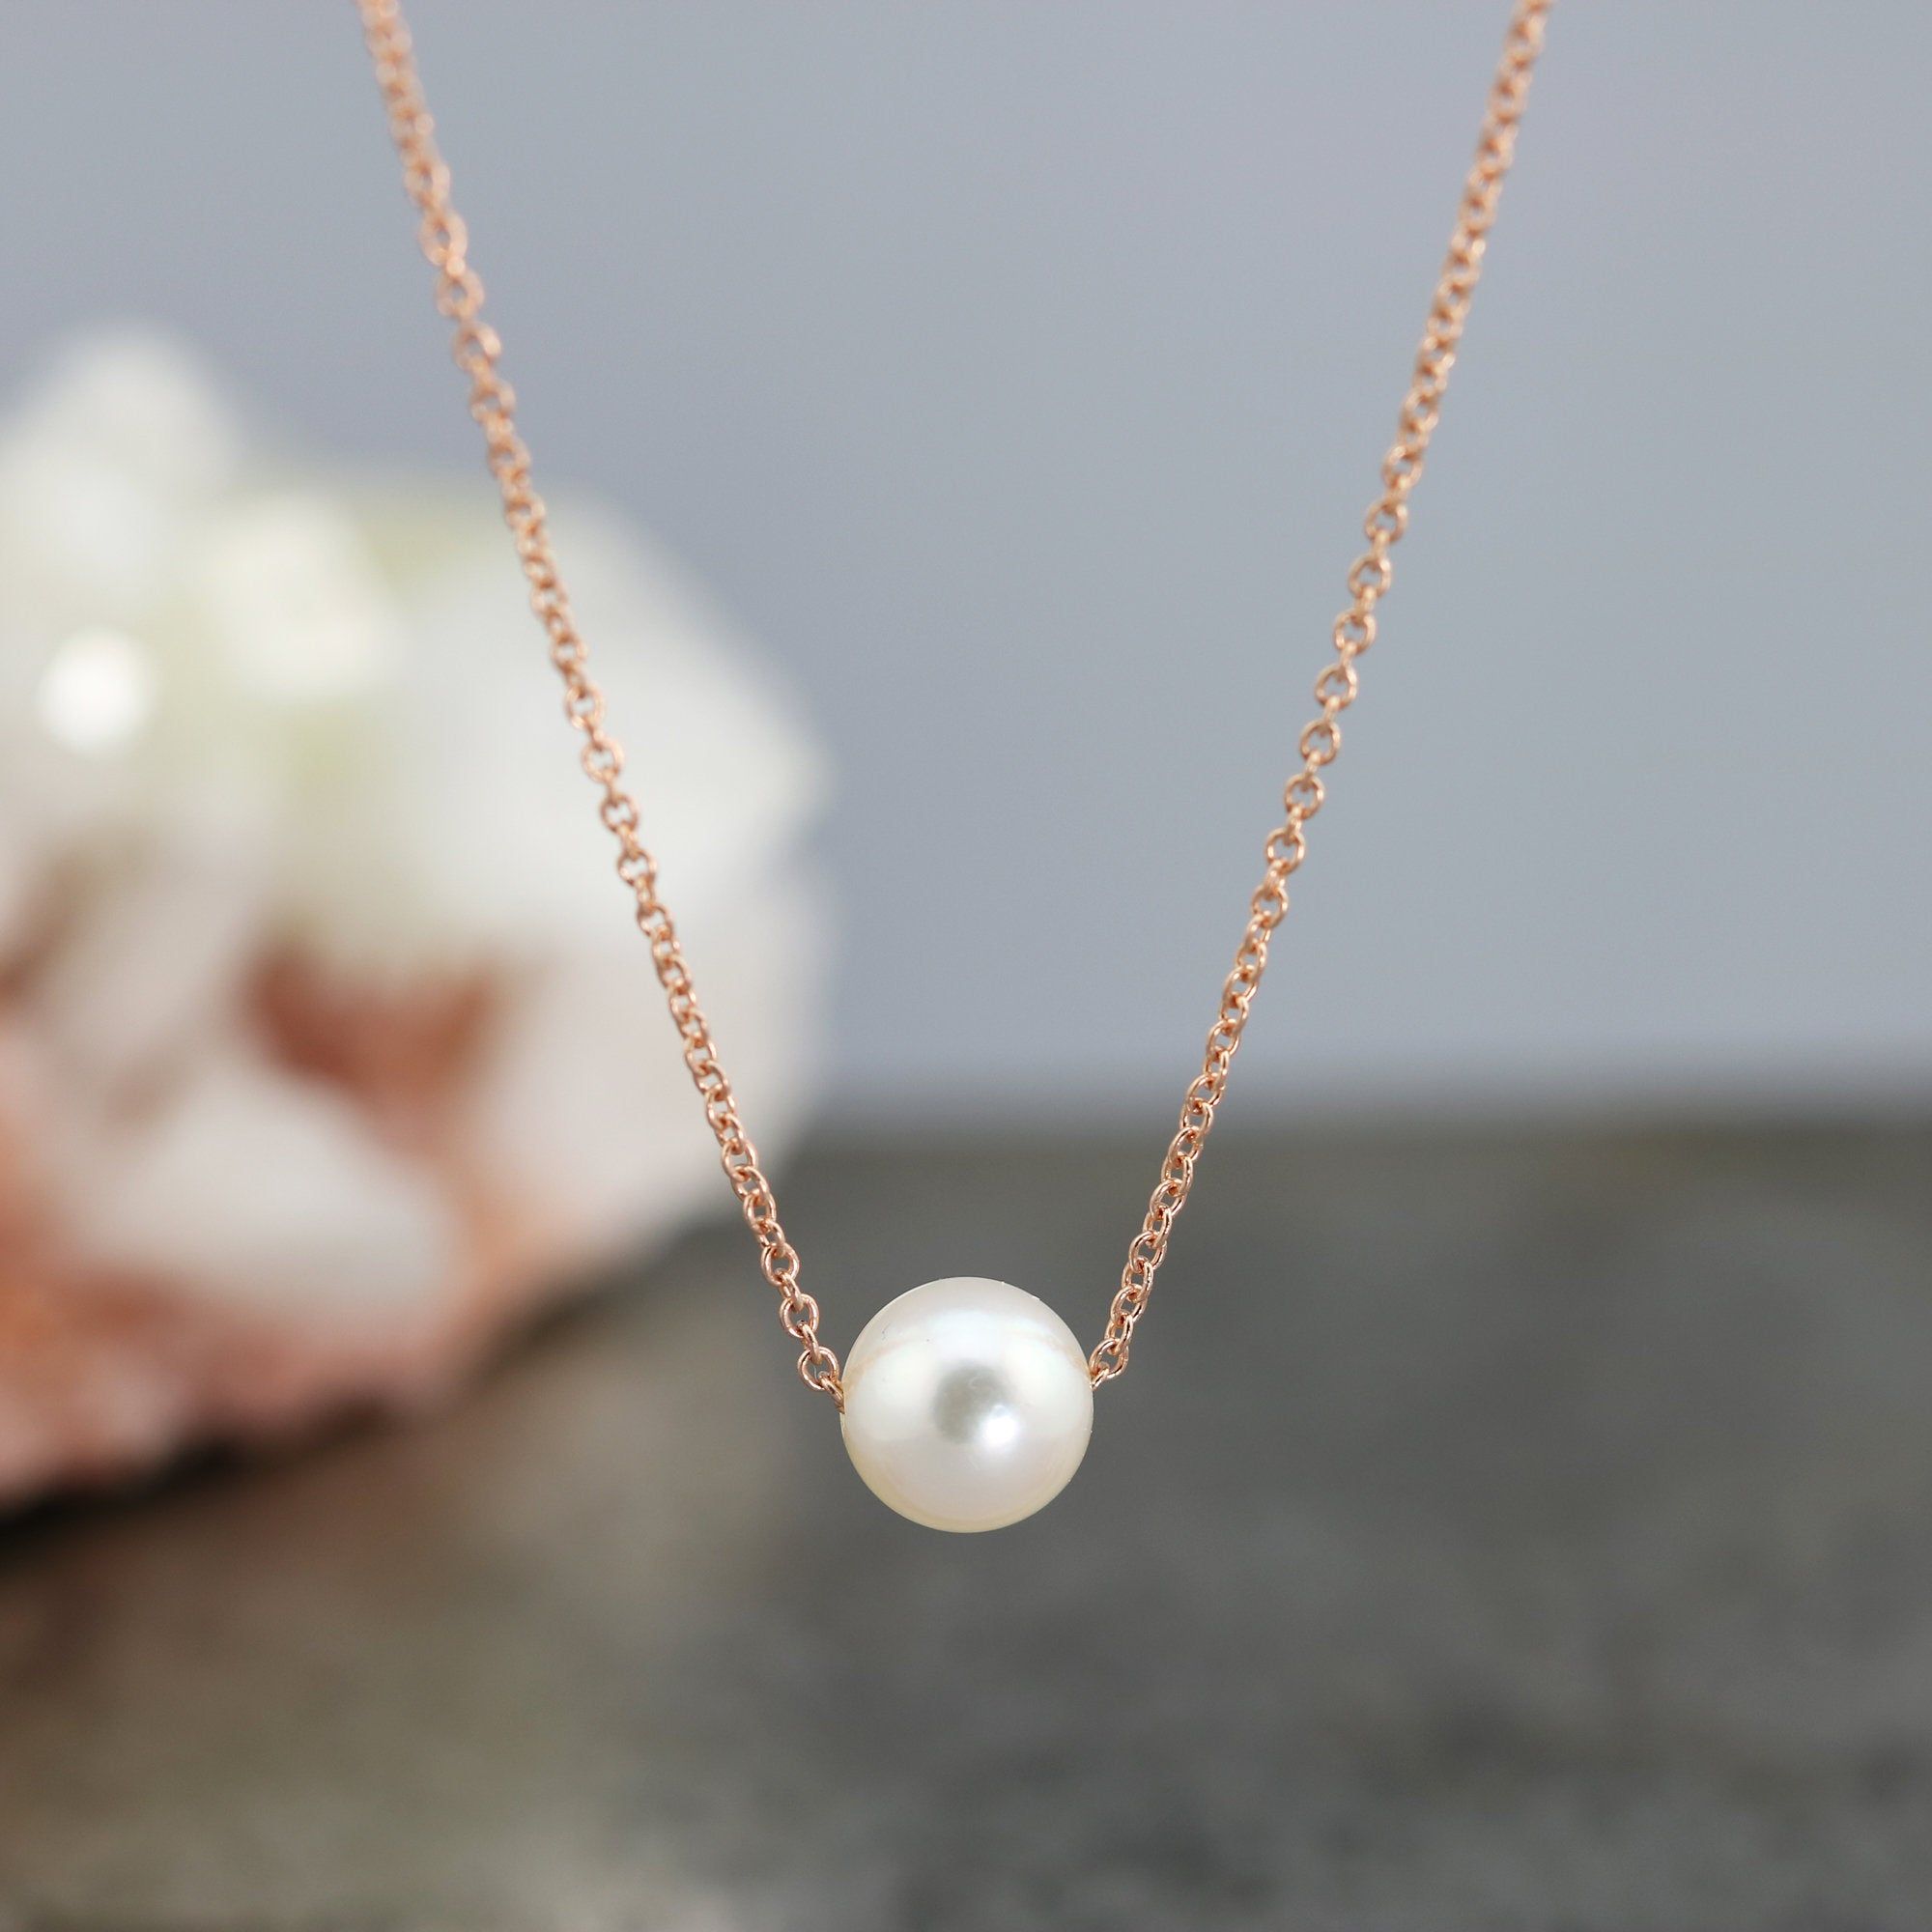 14k Rose Gold Pendant With White Cultured Freshwater Pearl – Delicate Gold  Cable Chain Necklace – Single Pearl Thin Chain – Ready To Ship Throughout Most Recently Released Offset Freshwater Cultured Pearl Circle Necklaces (View 1 of 25)